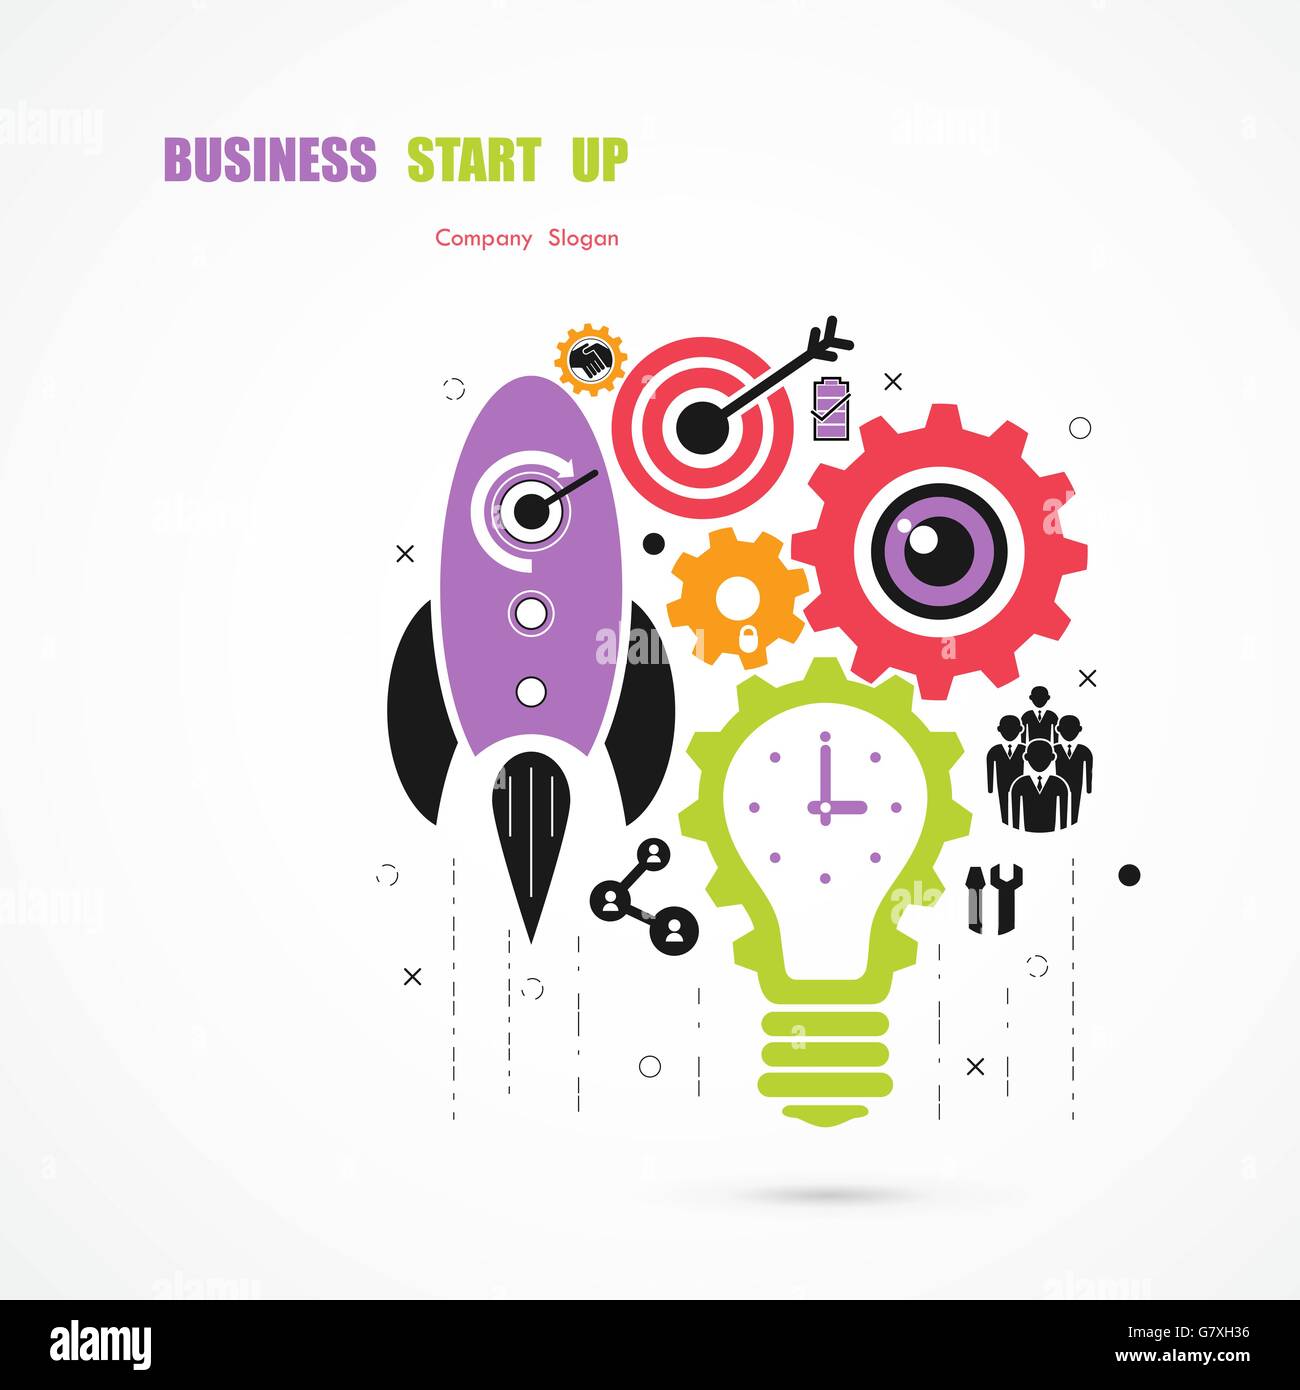 Business Start up icon concept.Light bulb icon and gear abstract vector icon design.Corporate business industrial creative icon Stock Vector